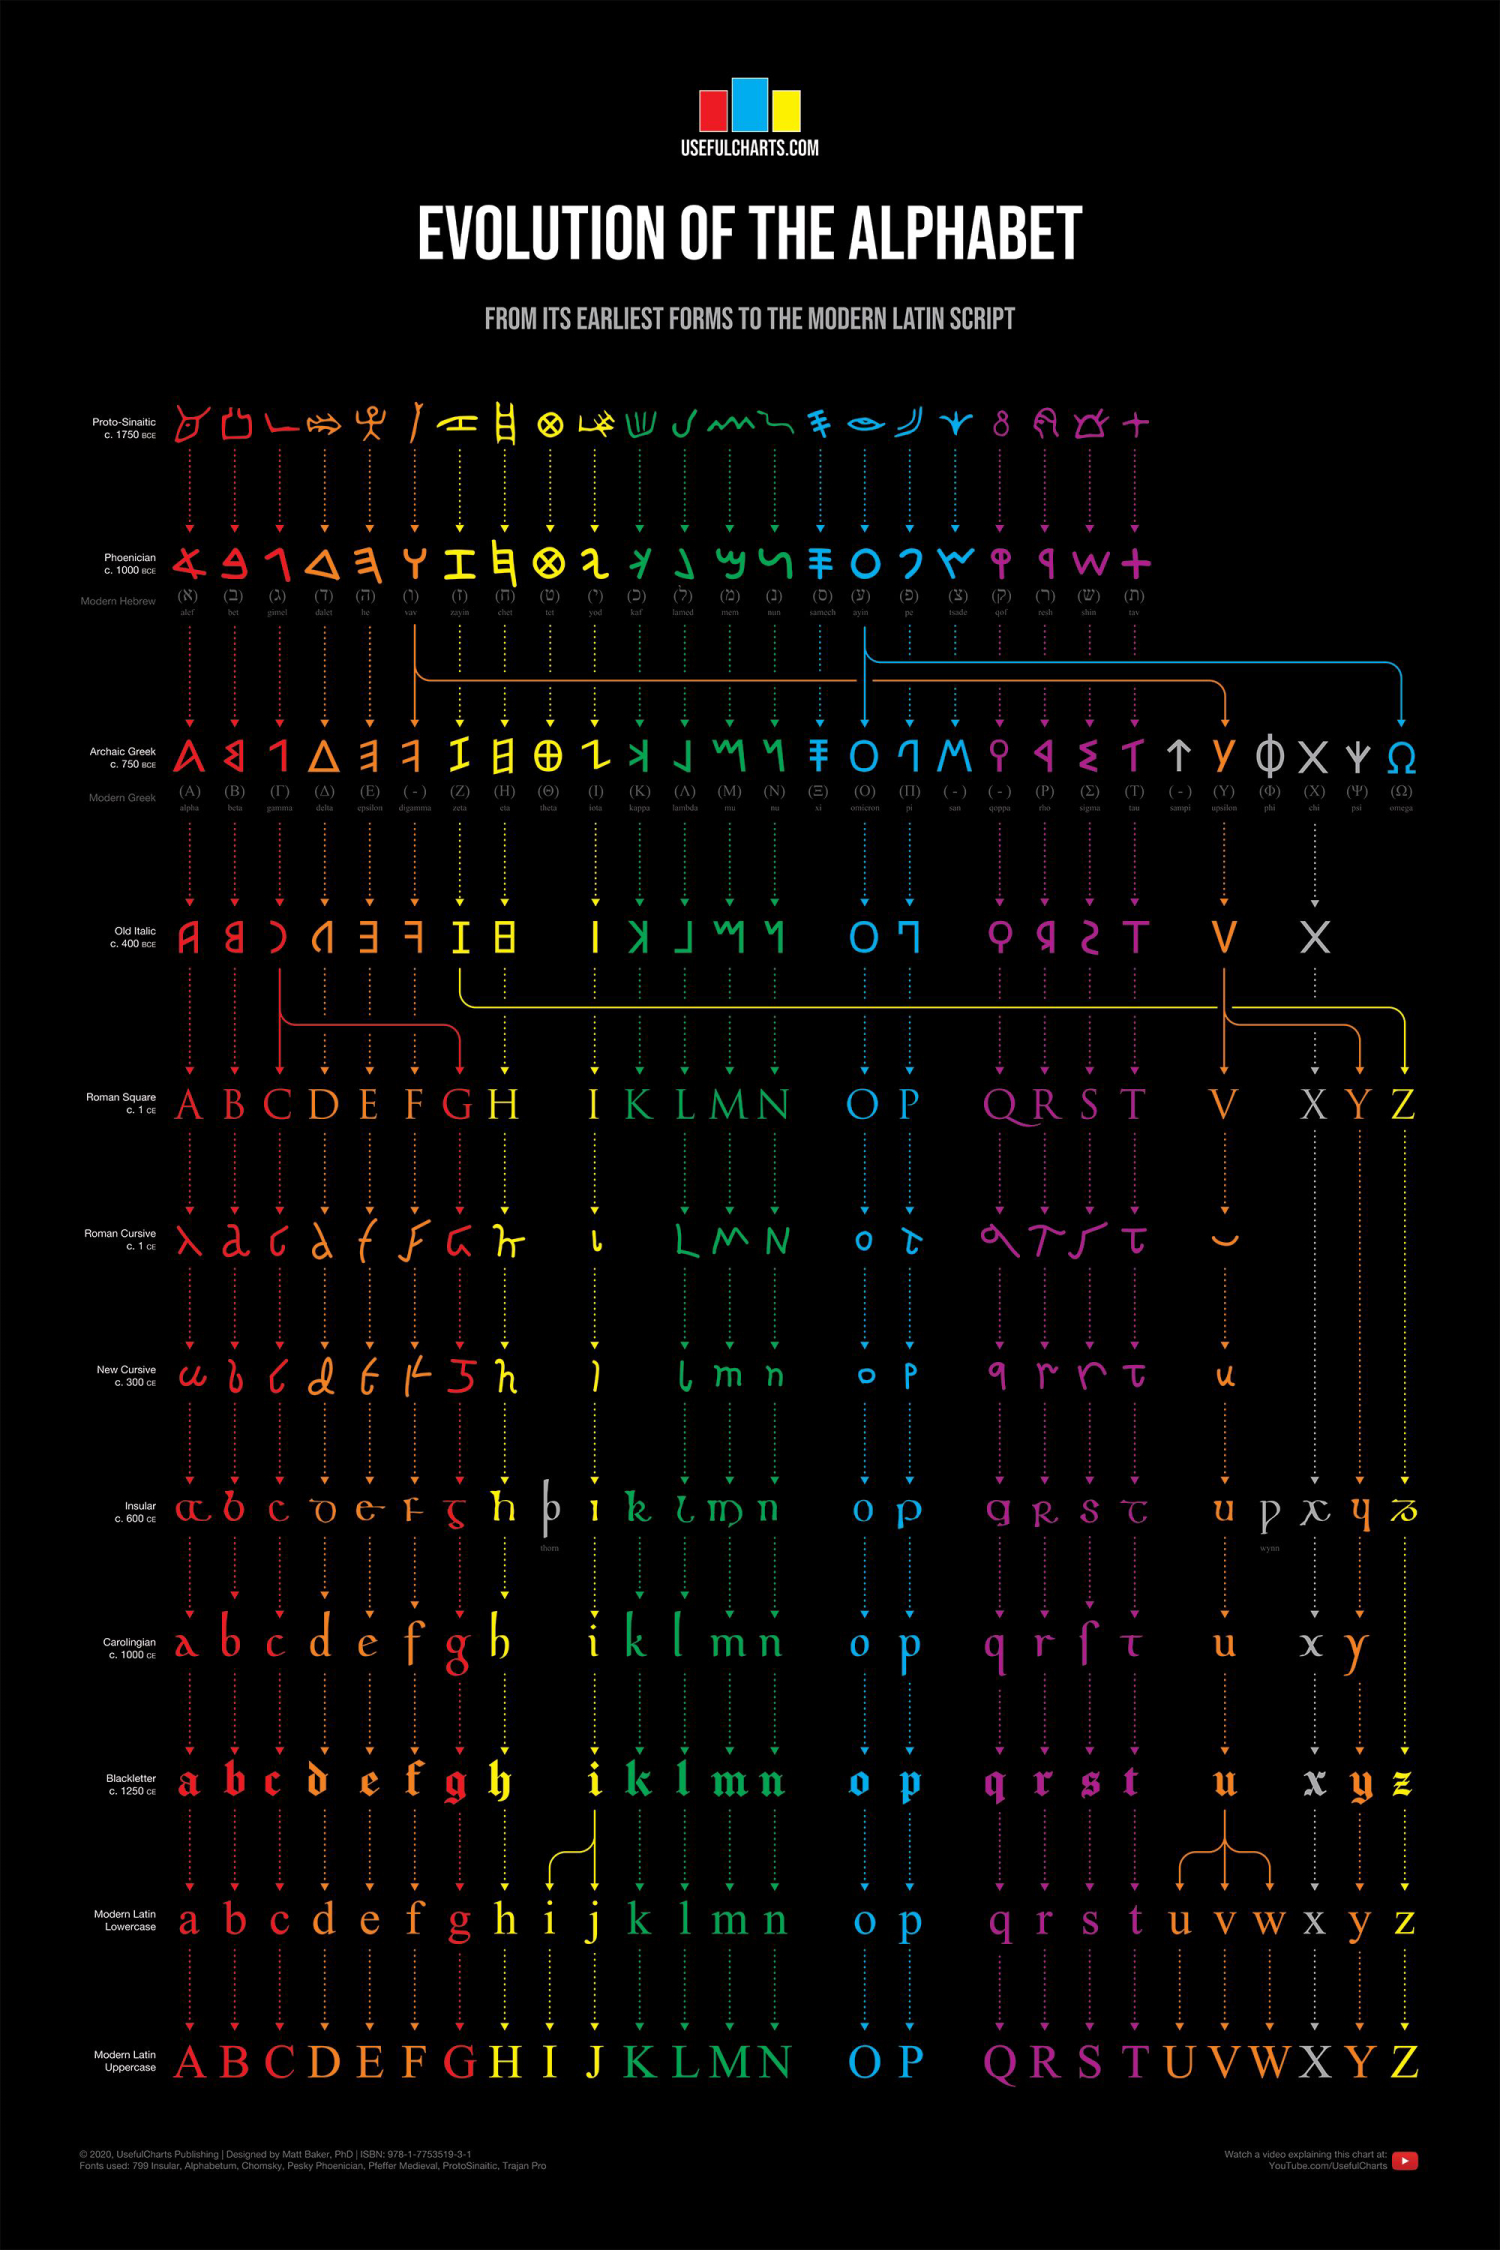 Black poster with the branding on top and then the rest of the content is a huge, multicolor diagram that details, visually, the evolution of each character of the alphabet, from proto-Sinaitic to modern Roman